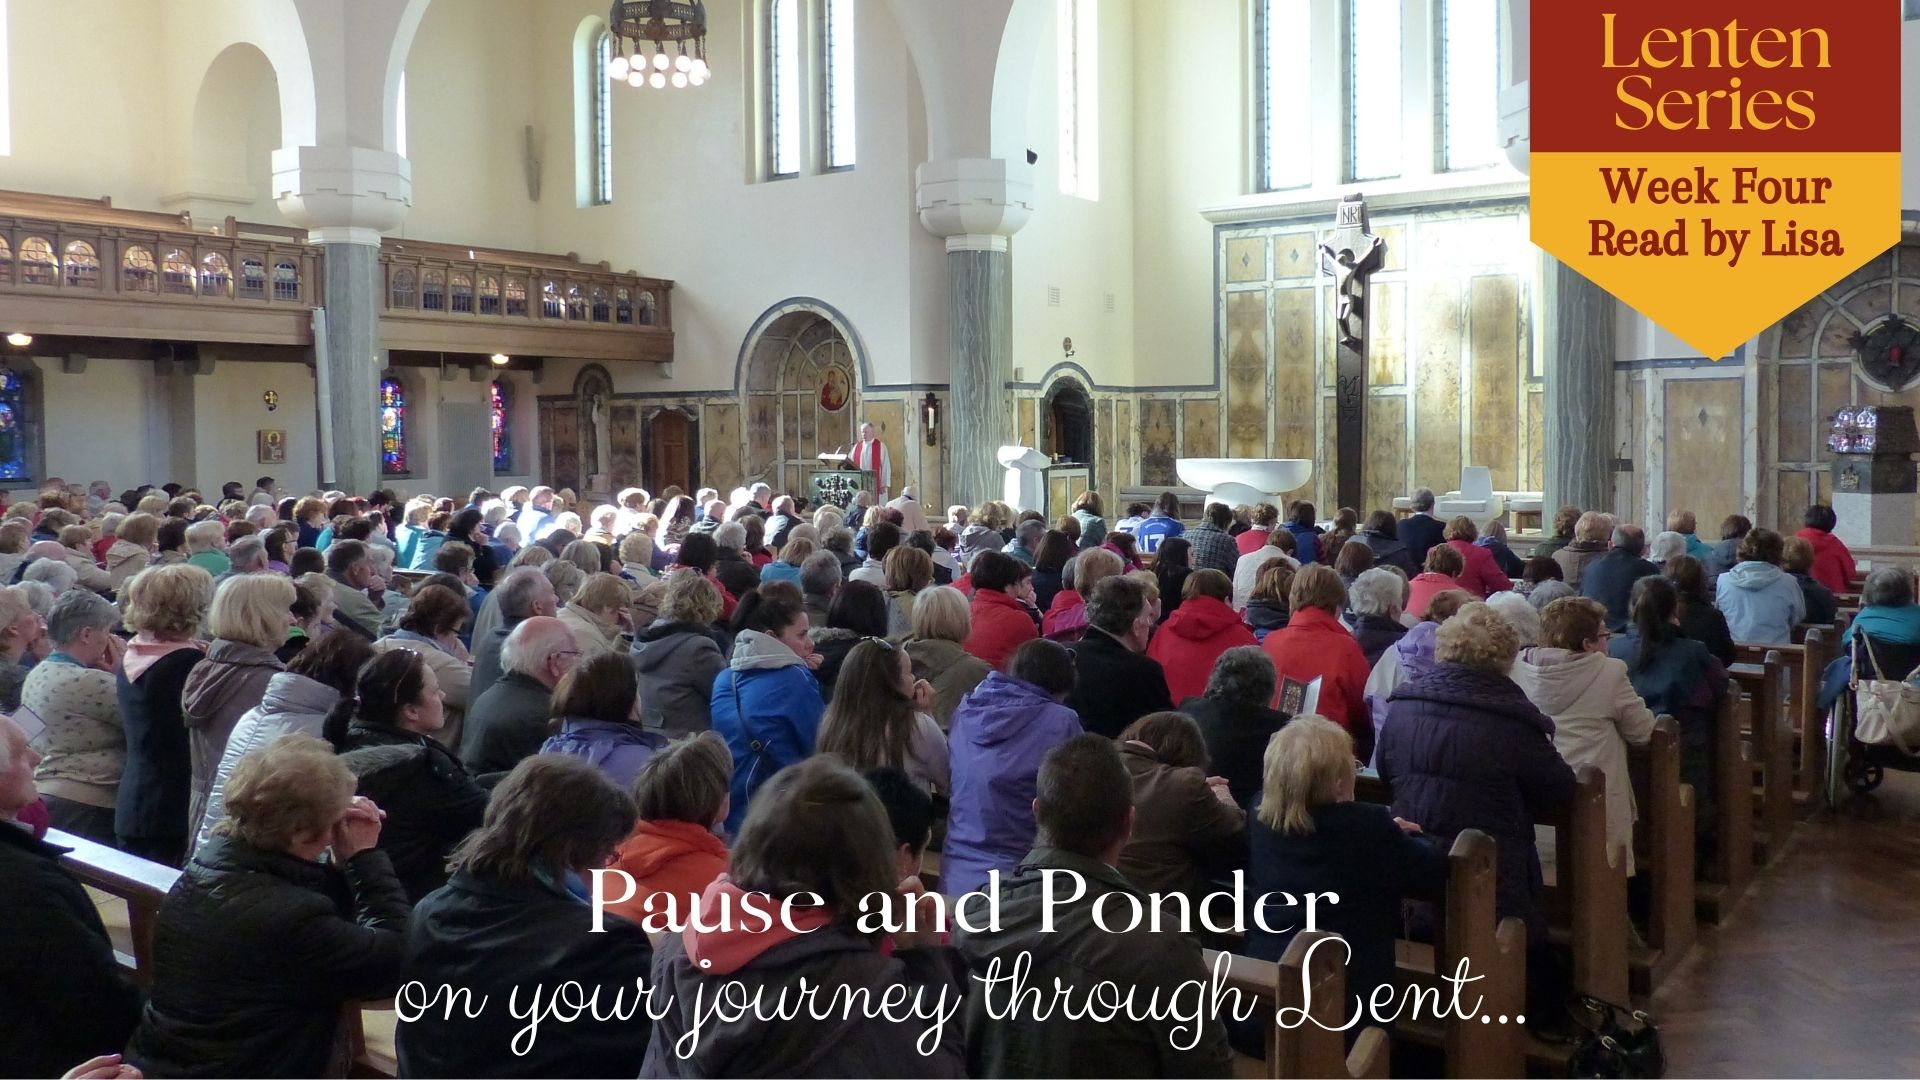 Pause and Ponder on your journey through Lent – week four, read by Lisa. Join Lough Derg on your Lenten journey each Monday.